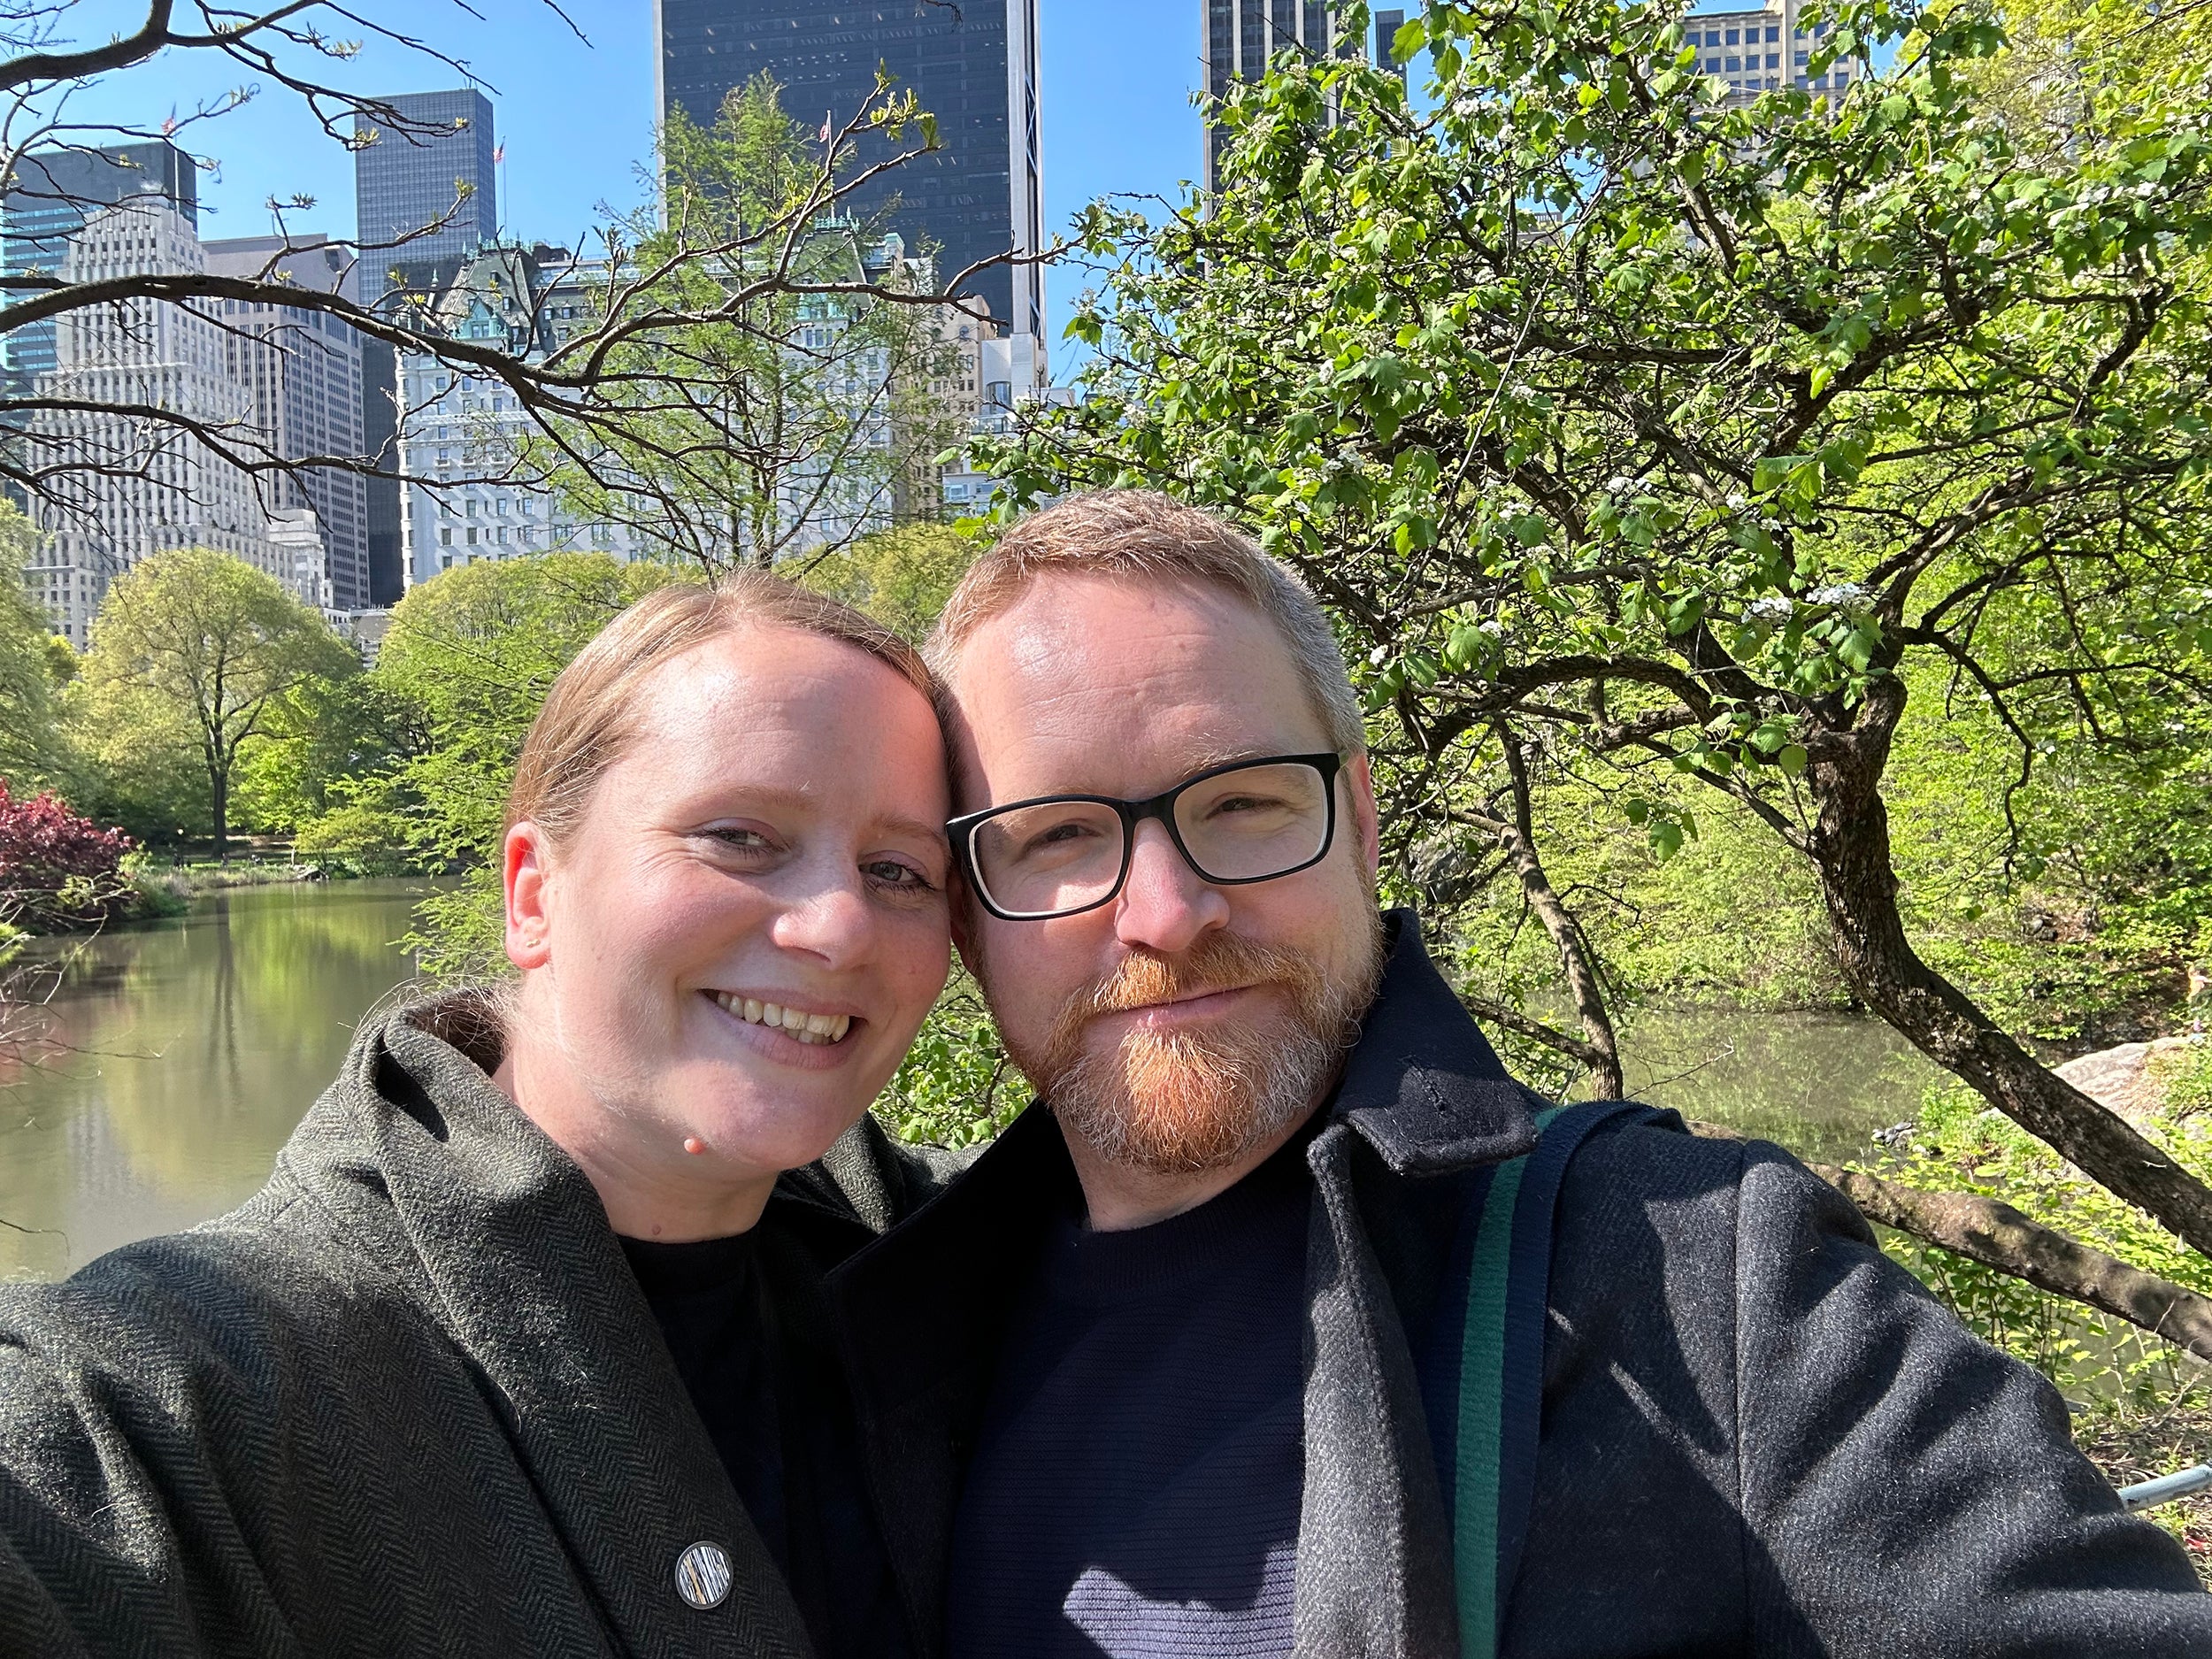 Emily and Chris photographed together in Central Park